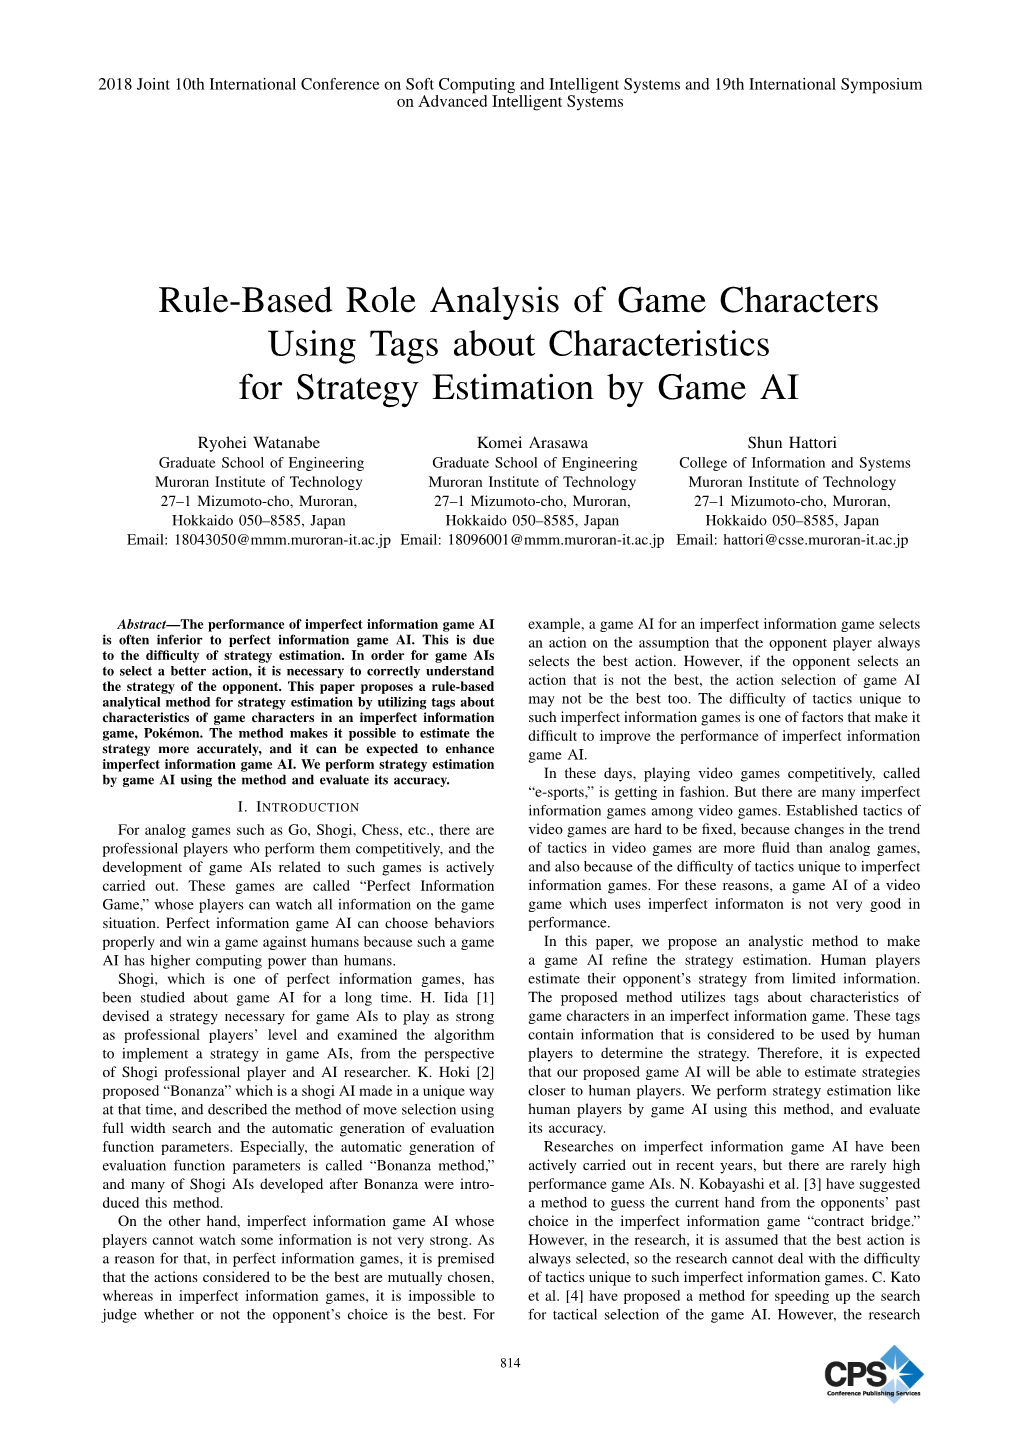 Rule-Based Role Analysis of Game Characters Using Tags About Characteristics for Strategy Estimation by Game AI